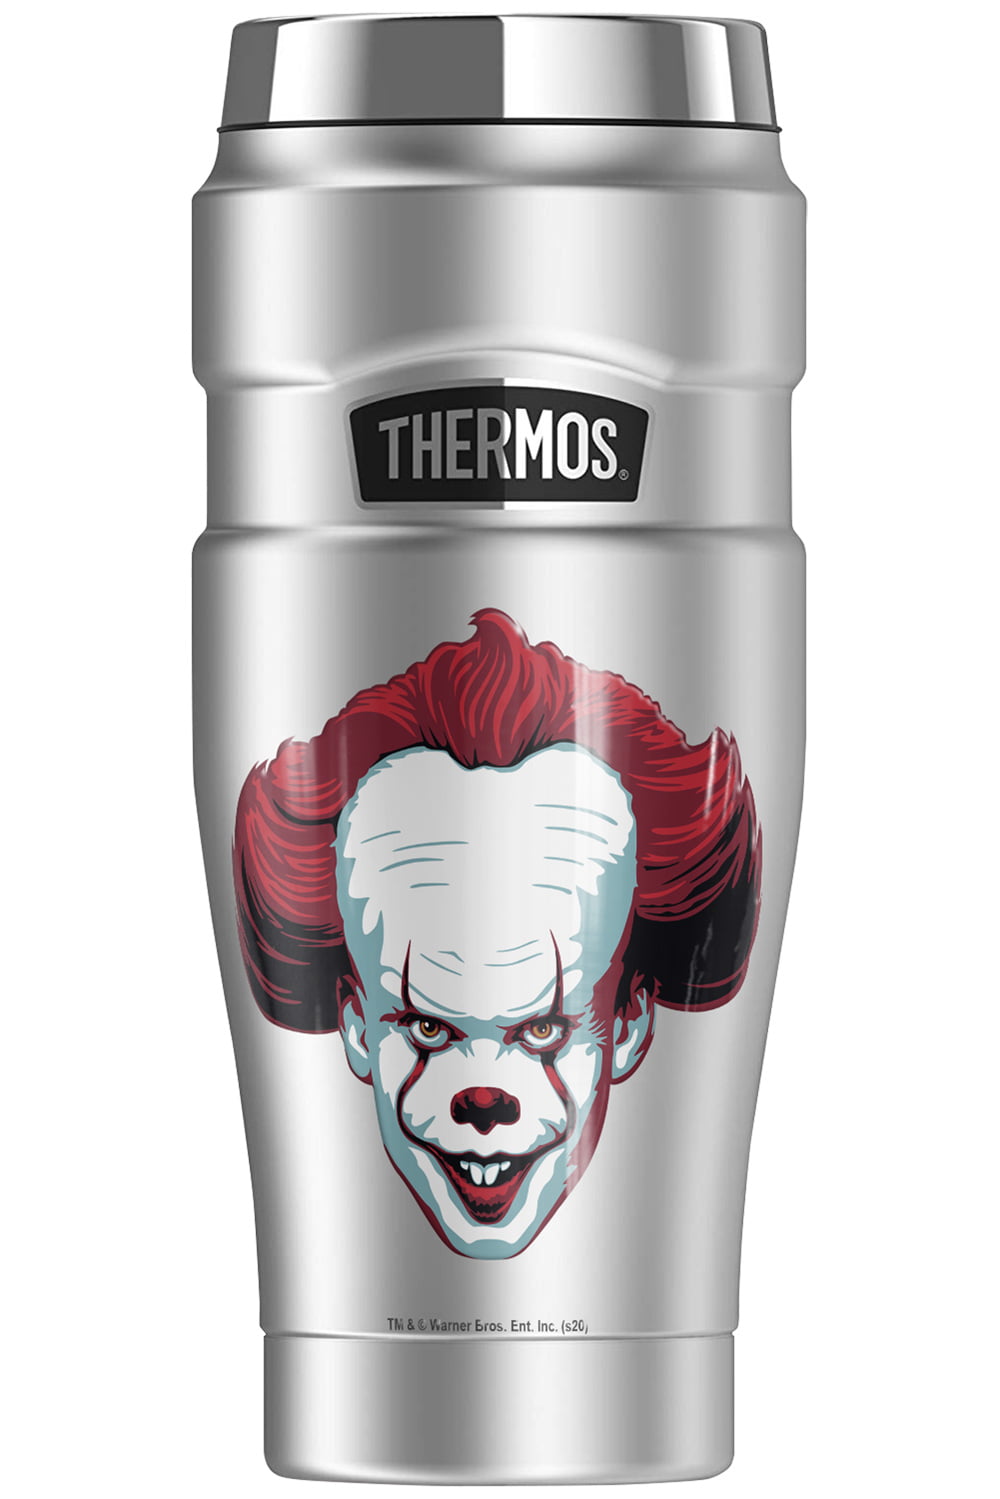 IT Pennywise 20oz Stainless Steel Tumbler